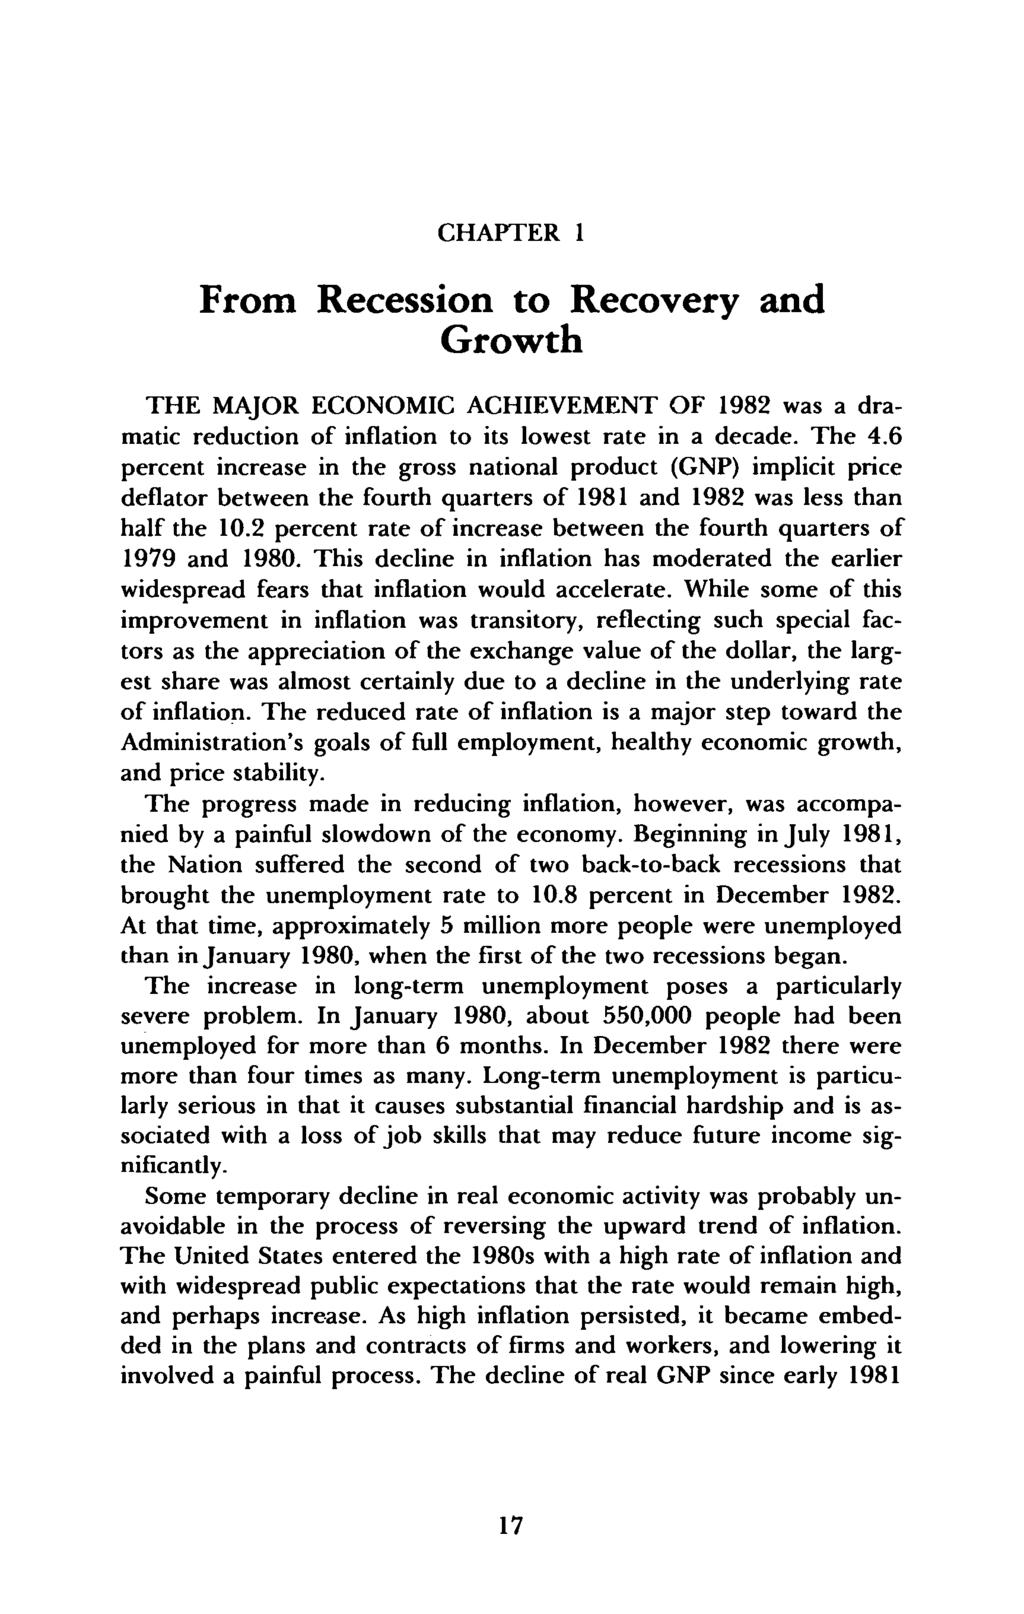 CHAPTER 1 From Recession to Recovery and Growth THE MAJOR ECONOMIC ACHIEVEMENT OF 1982 was a dramatic reduction of inflation to its lowest rate in a decade. The 4.